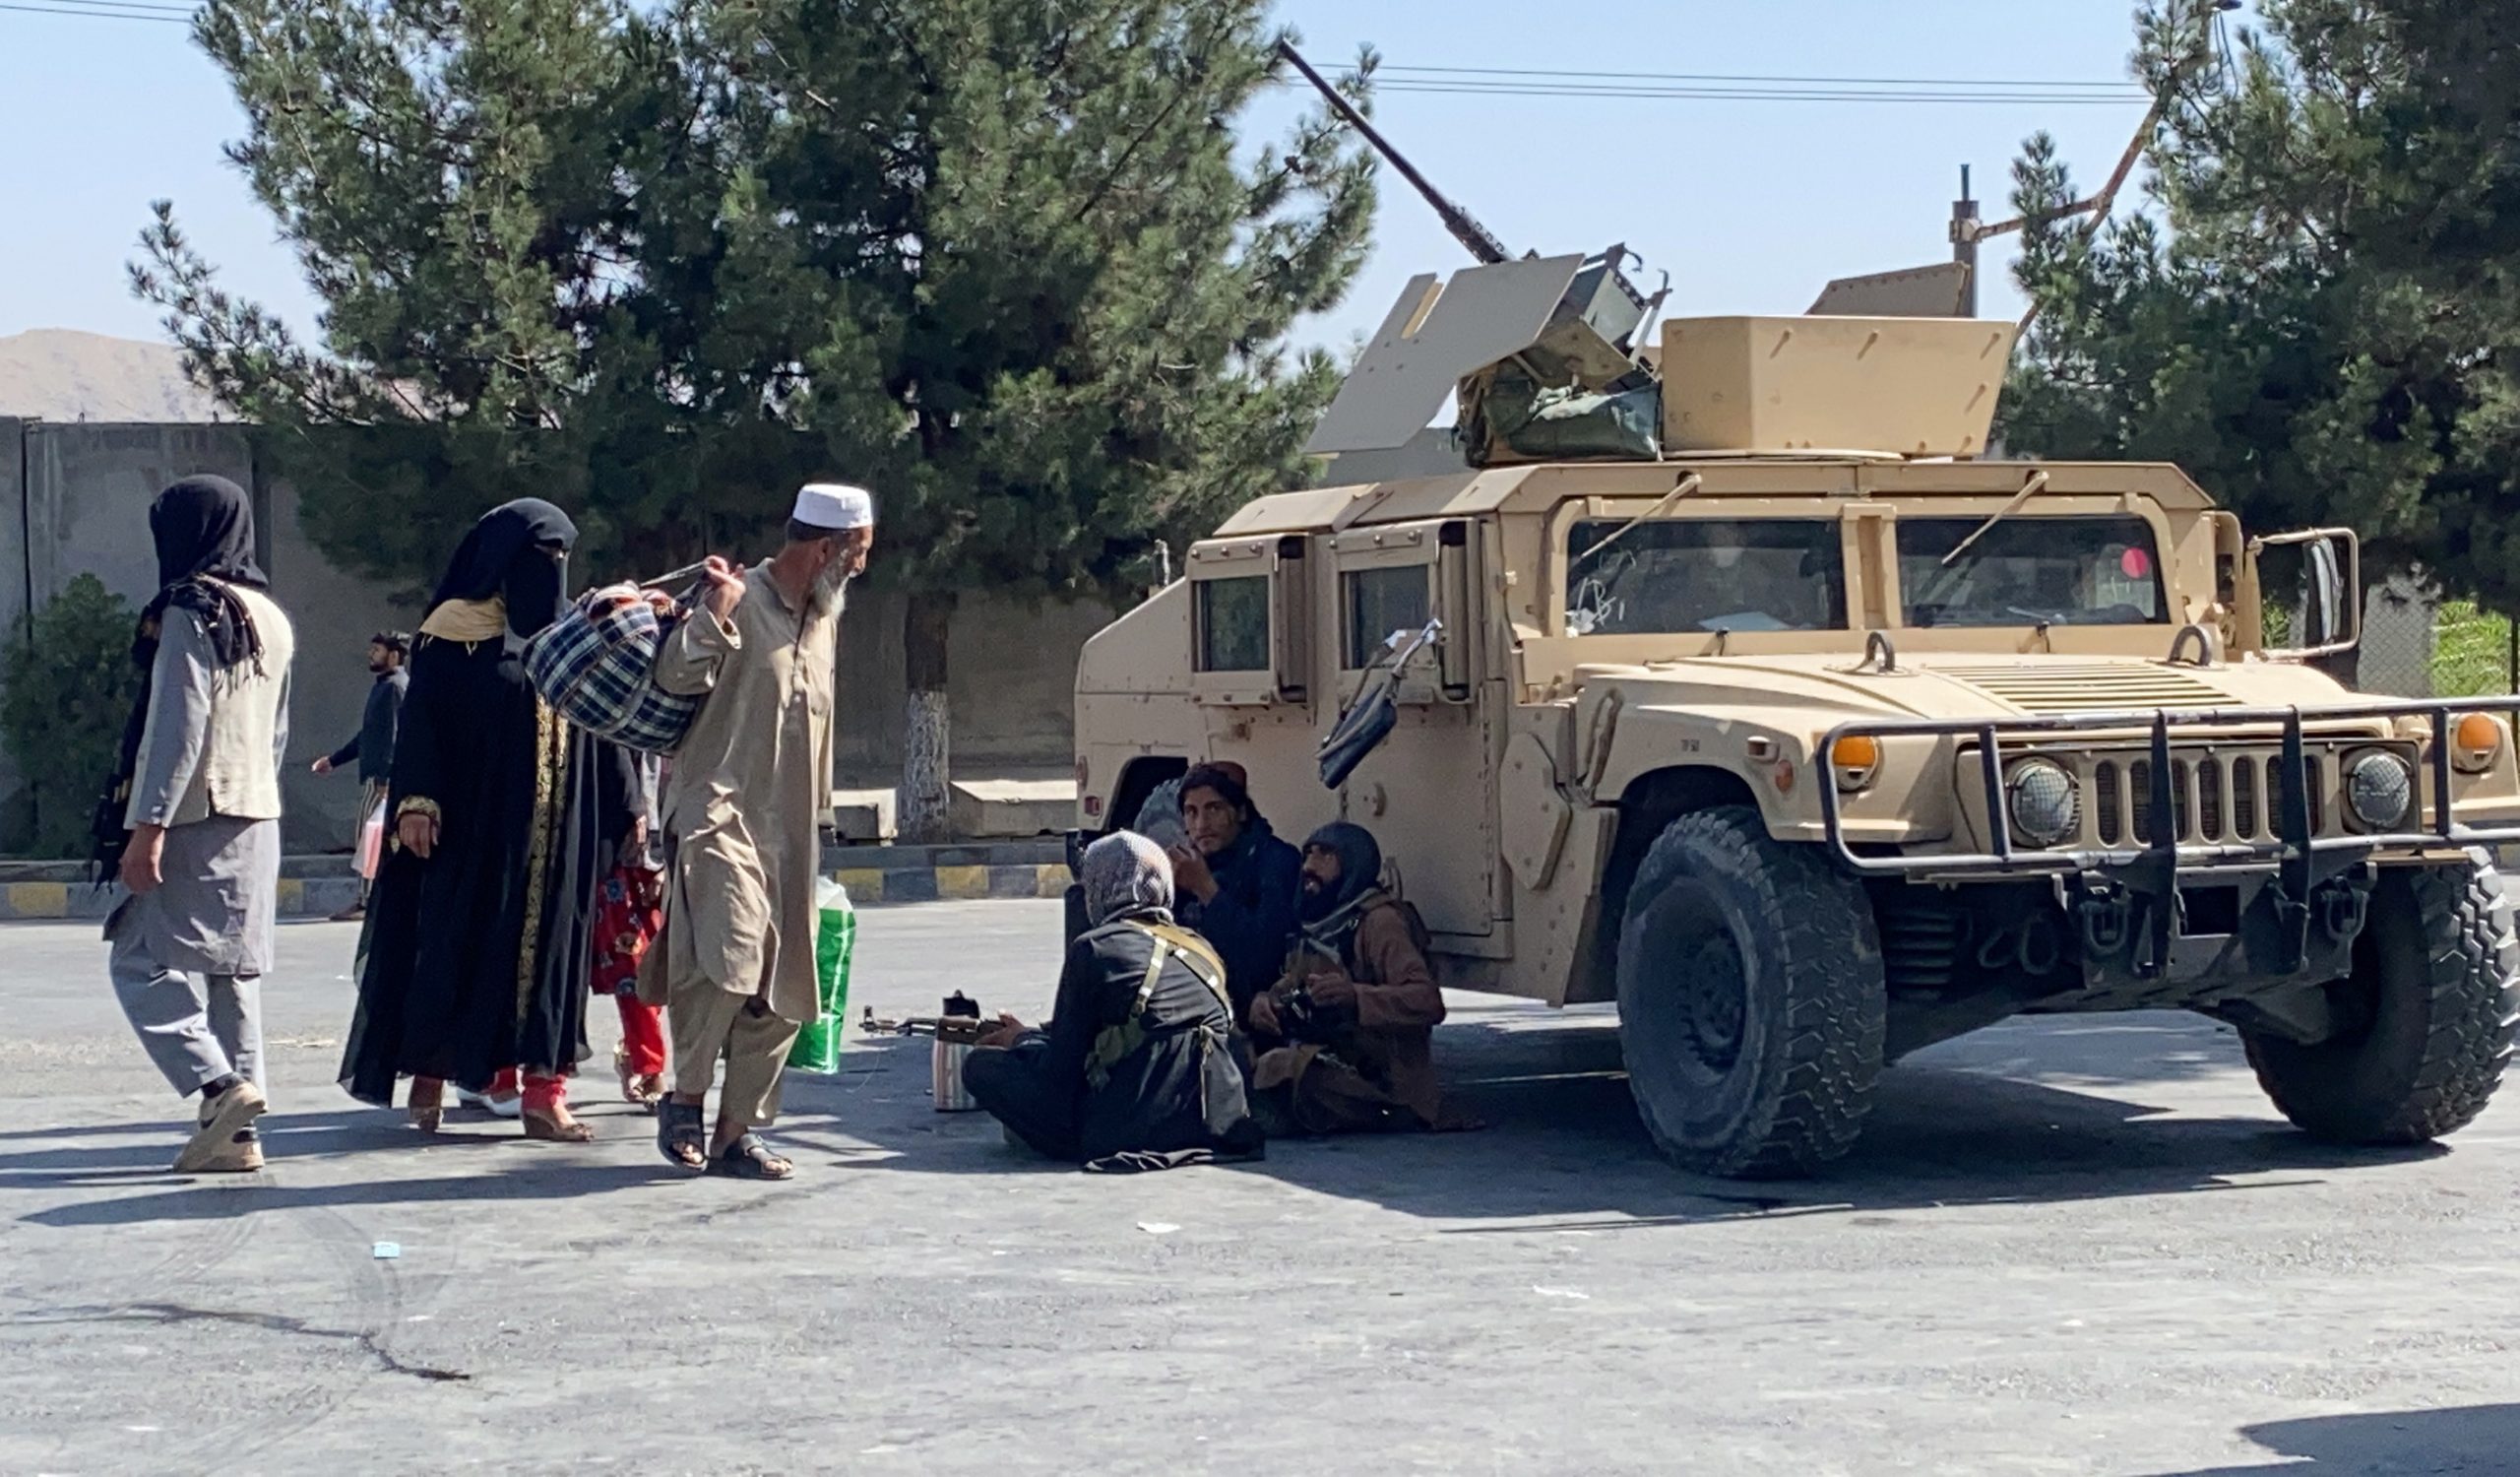 epa09431752 Taliban stand guard as they block the road to Hamid Karzai Airport a day after deadly blasts, in Kabul, Afghanistan, 27 August 2021. Two explosions outside Kabul's international airport on 26 August left more than 60 Afghan civilians dead and 140 others wounded, while the United States military said that 12 of its personnel died.  EPA/STRINGER